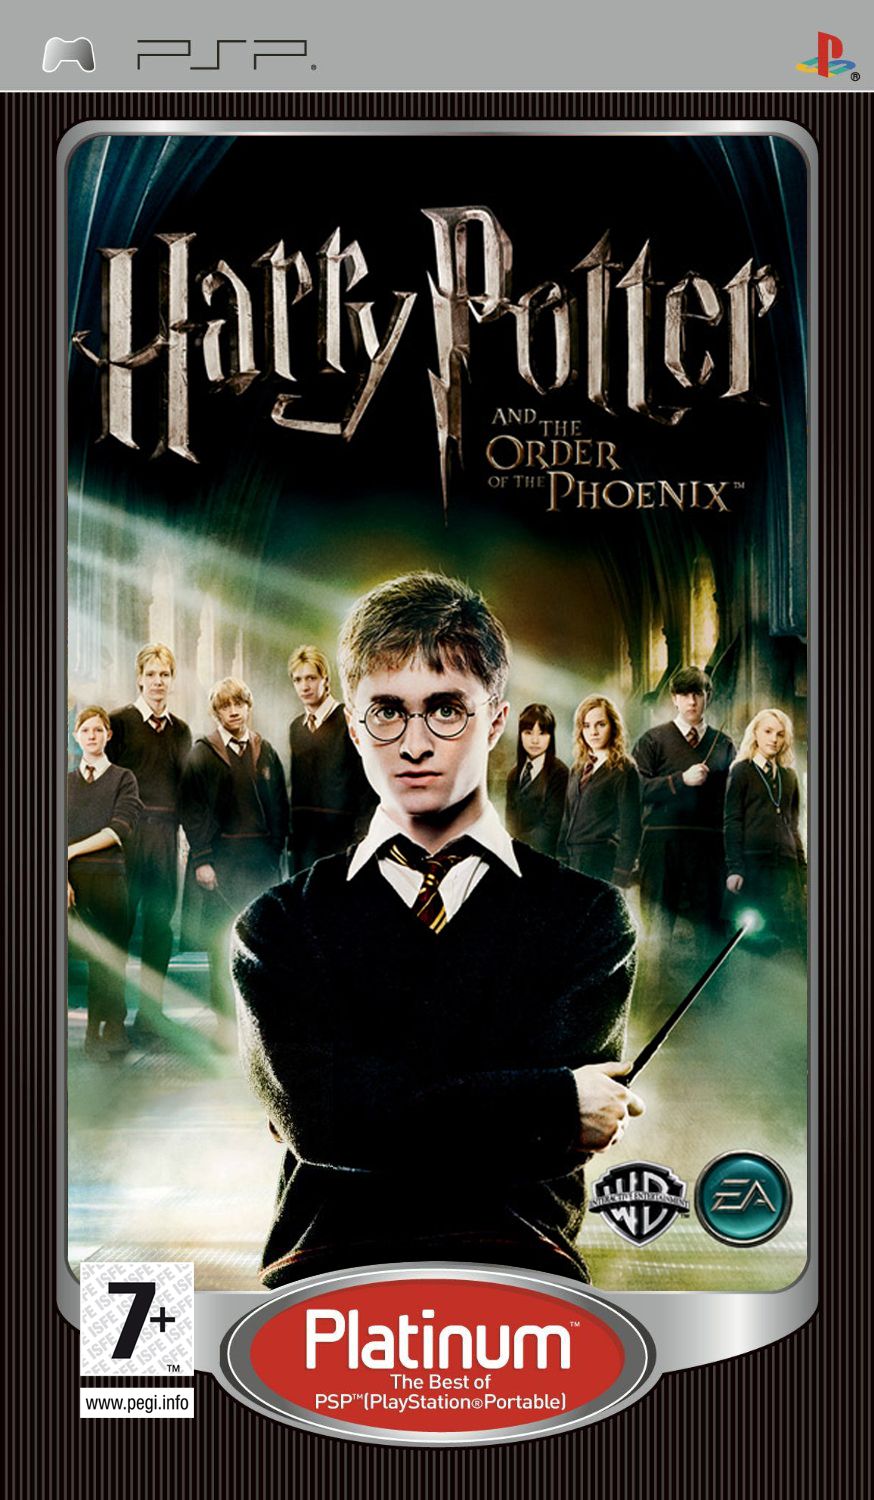 Harry Potter and the Order of the Phoenix - Platinum (PSP) | PlayStation Portable